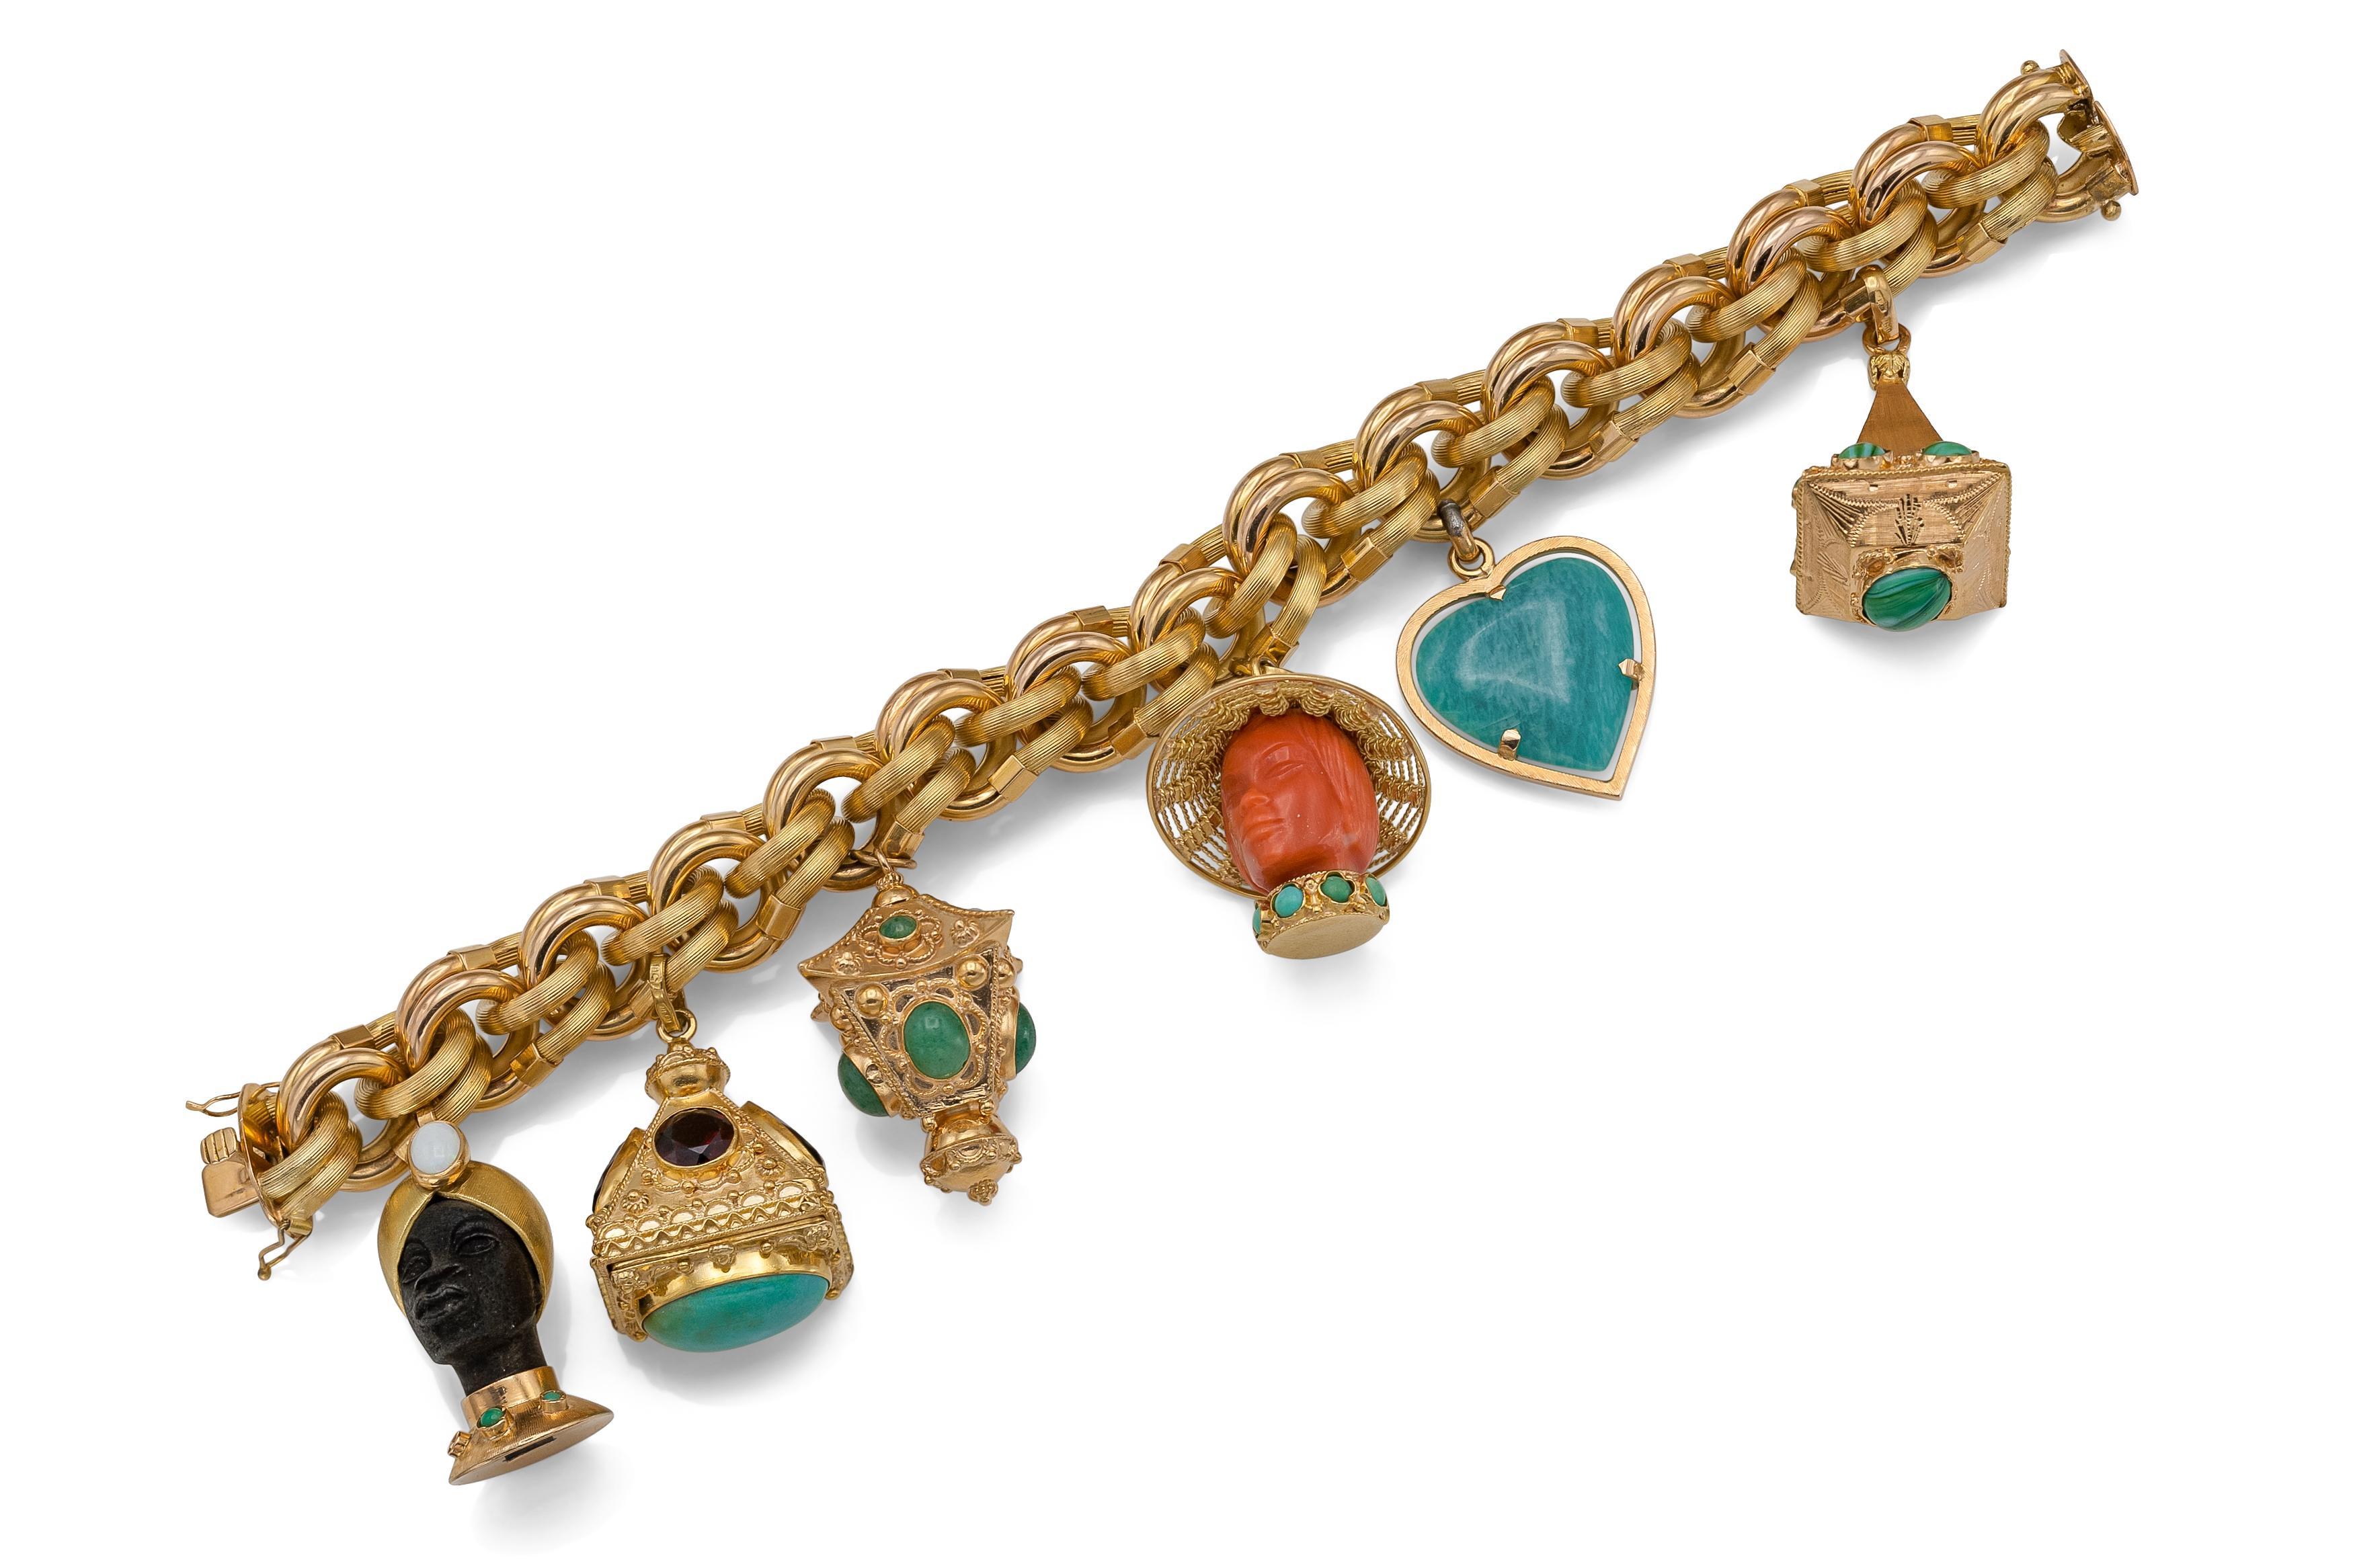 Vintage 1950s Chunky Charm Bracelet In Good Condition For Sale In New York, NY